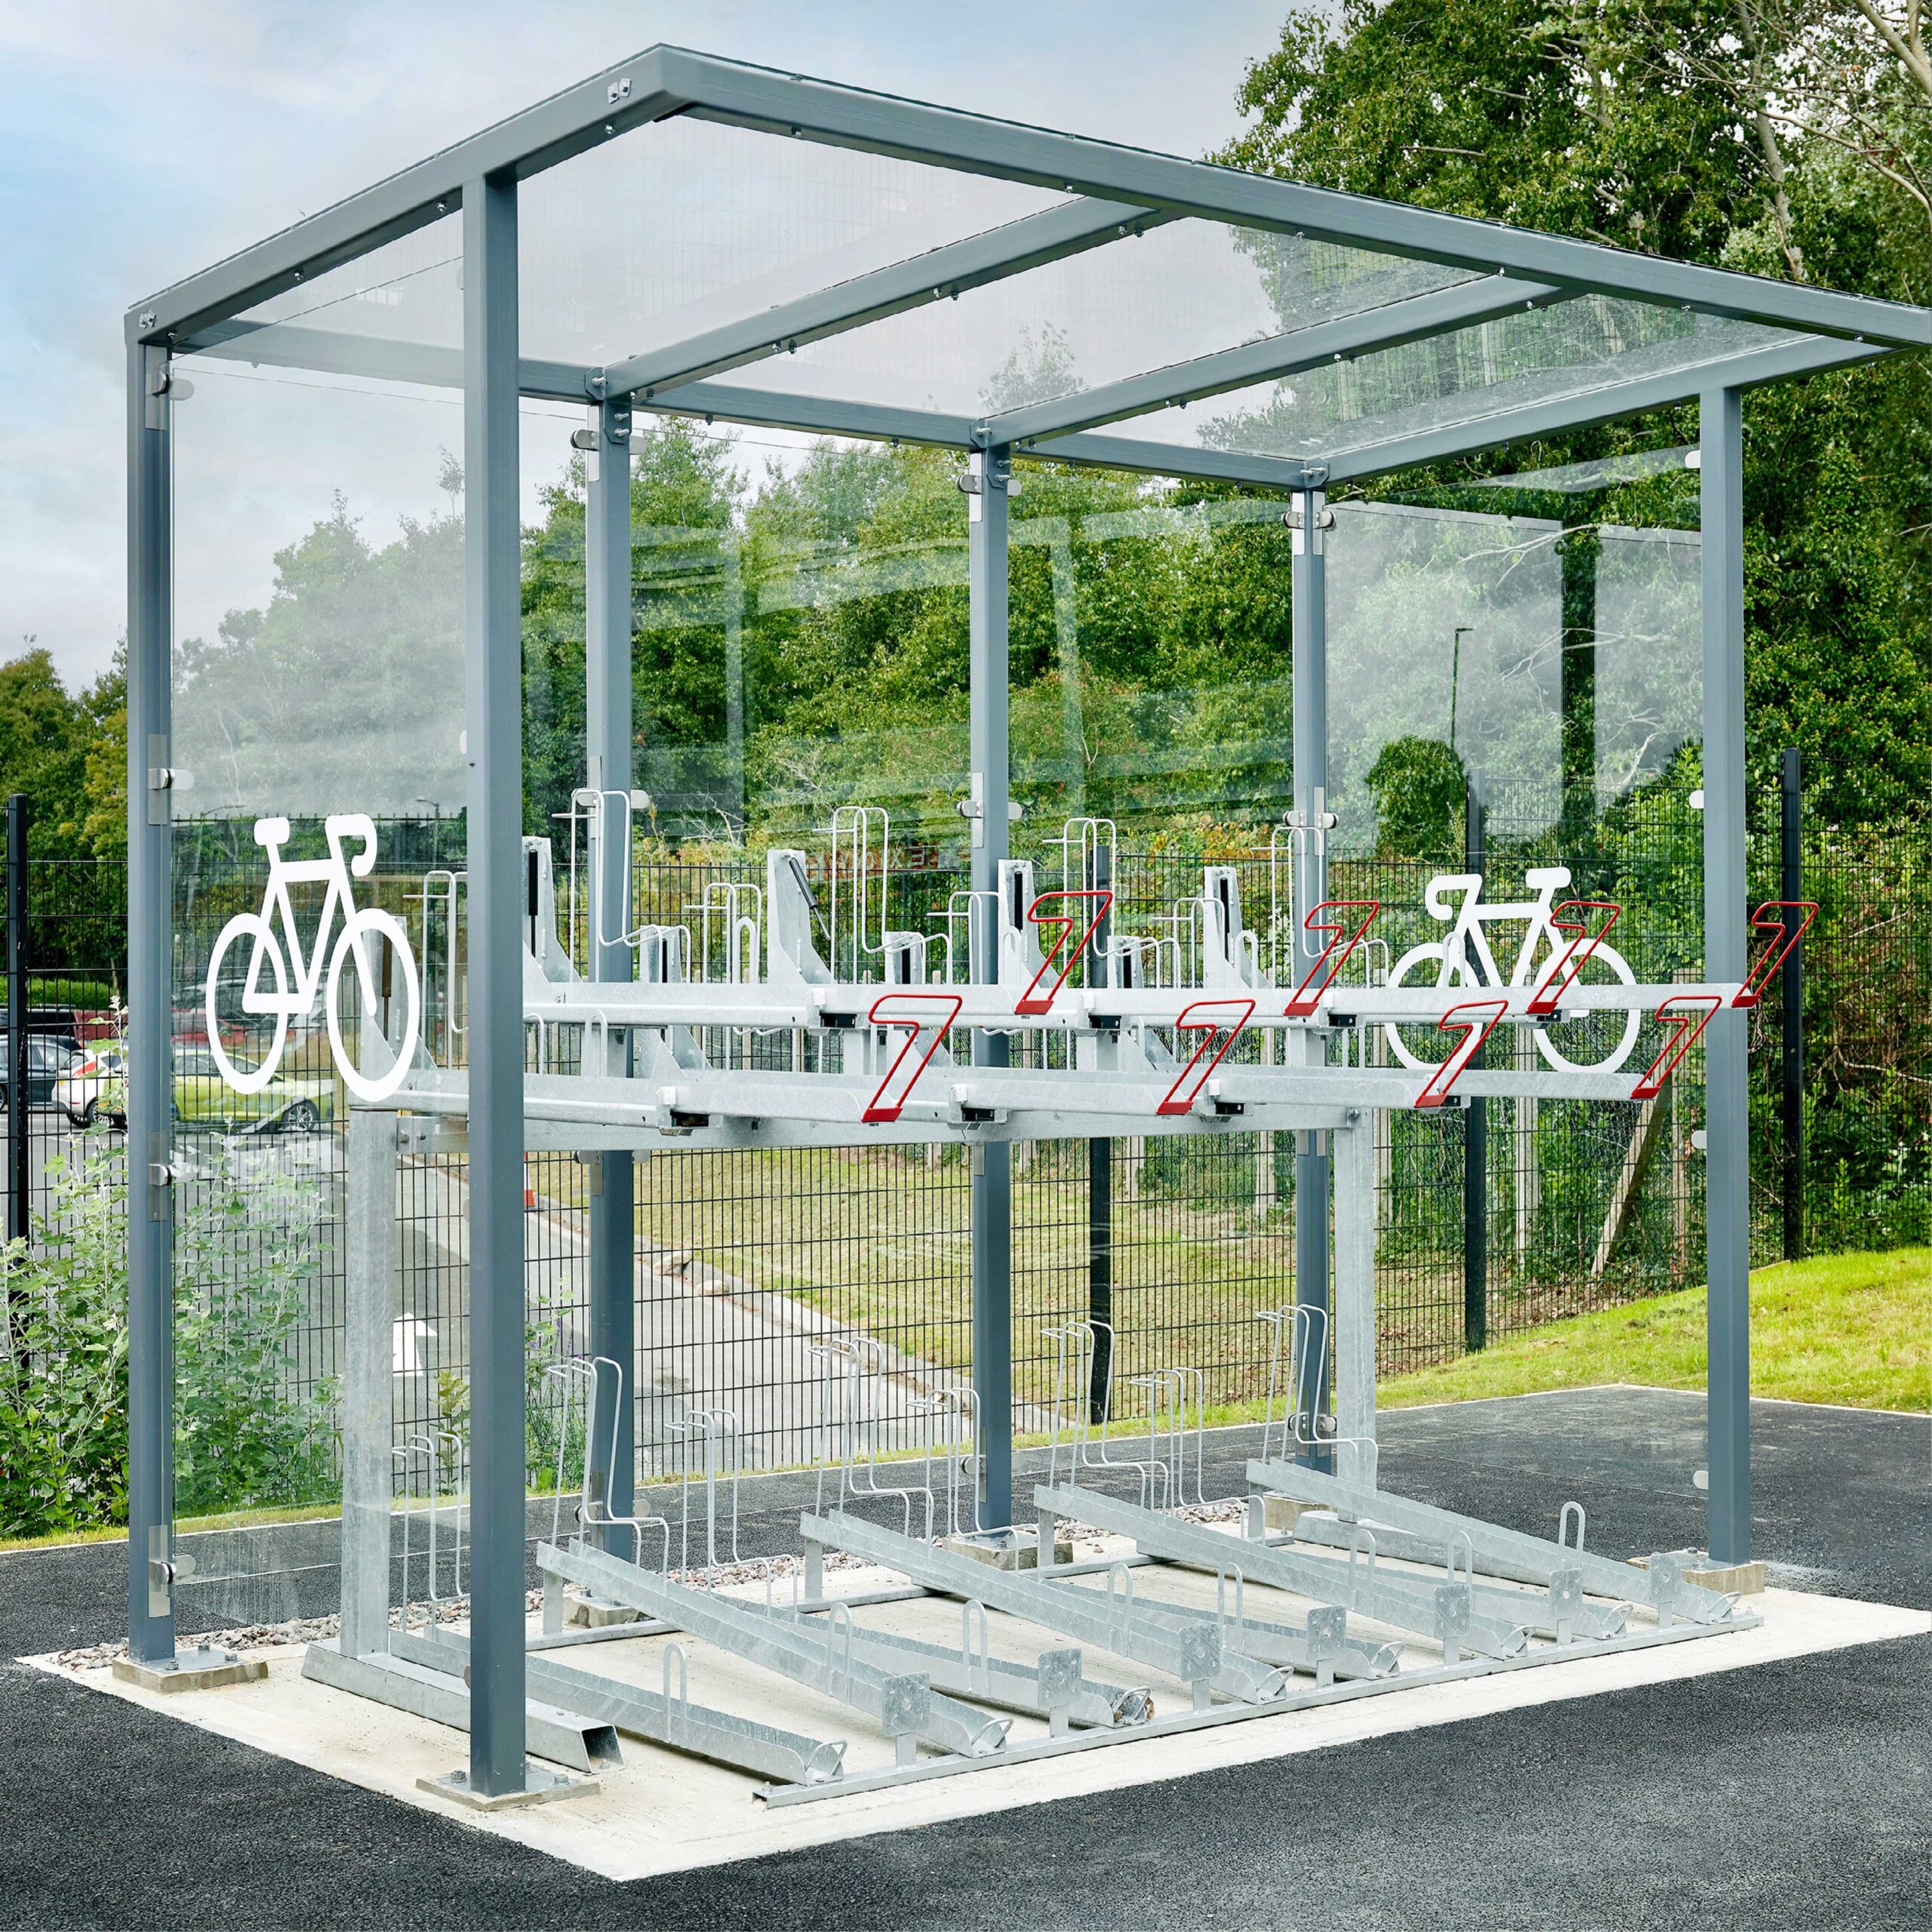 A modern outdoor bicycle parking shelter equipped with secured bike racks and surrounded by greenery and a wooden fence.